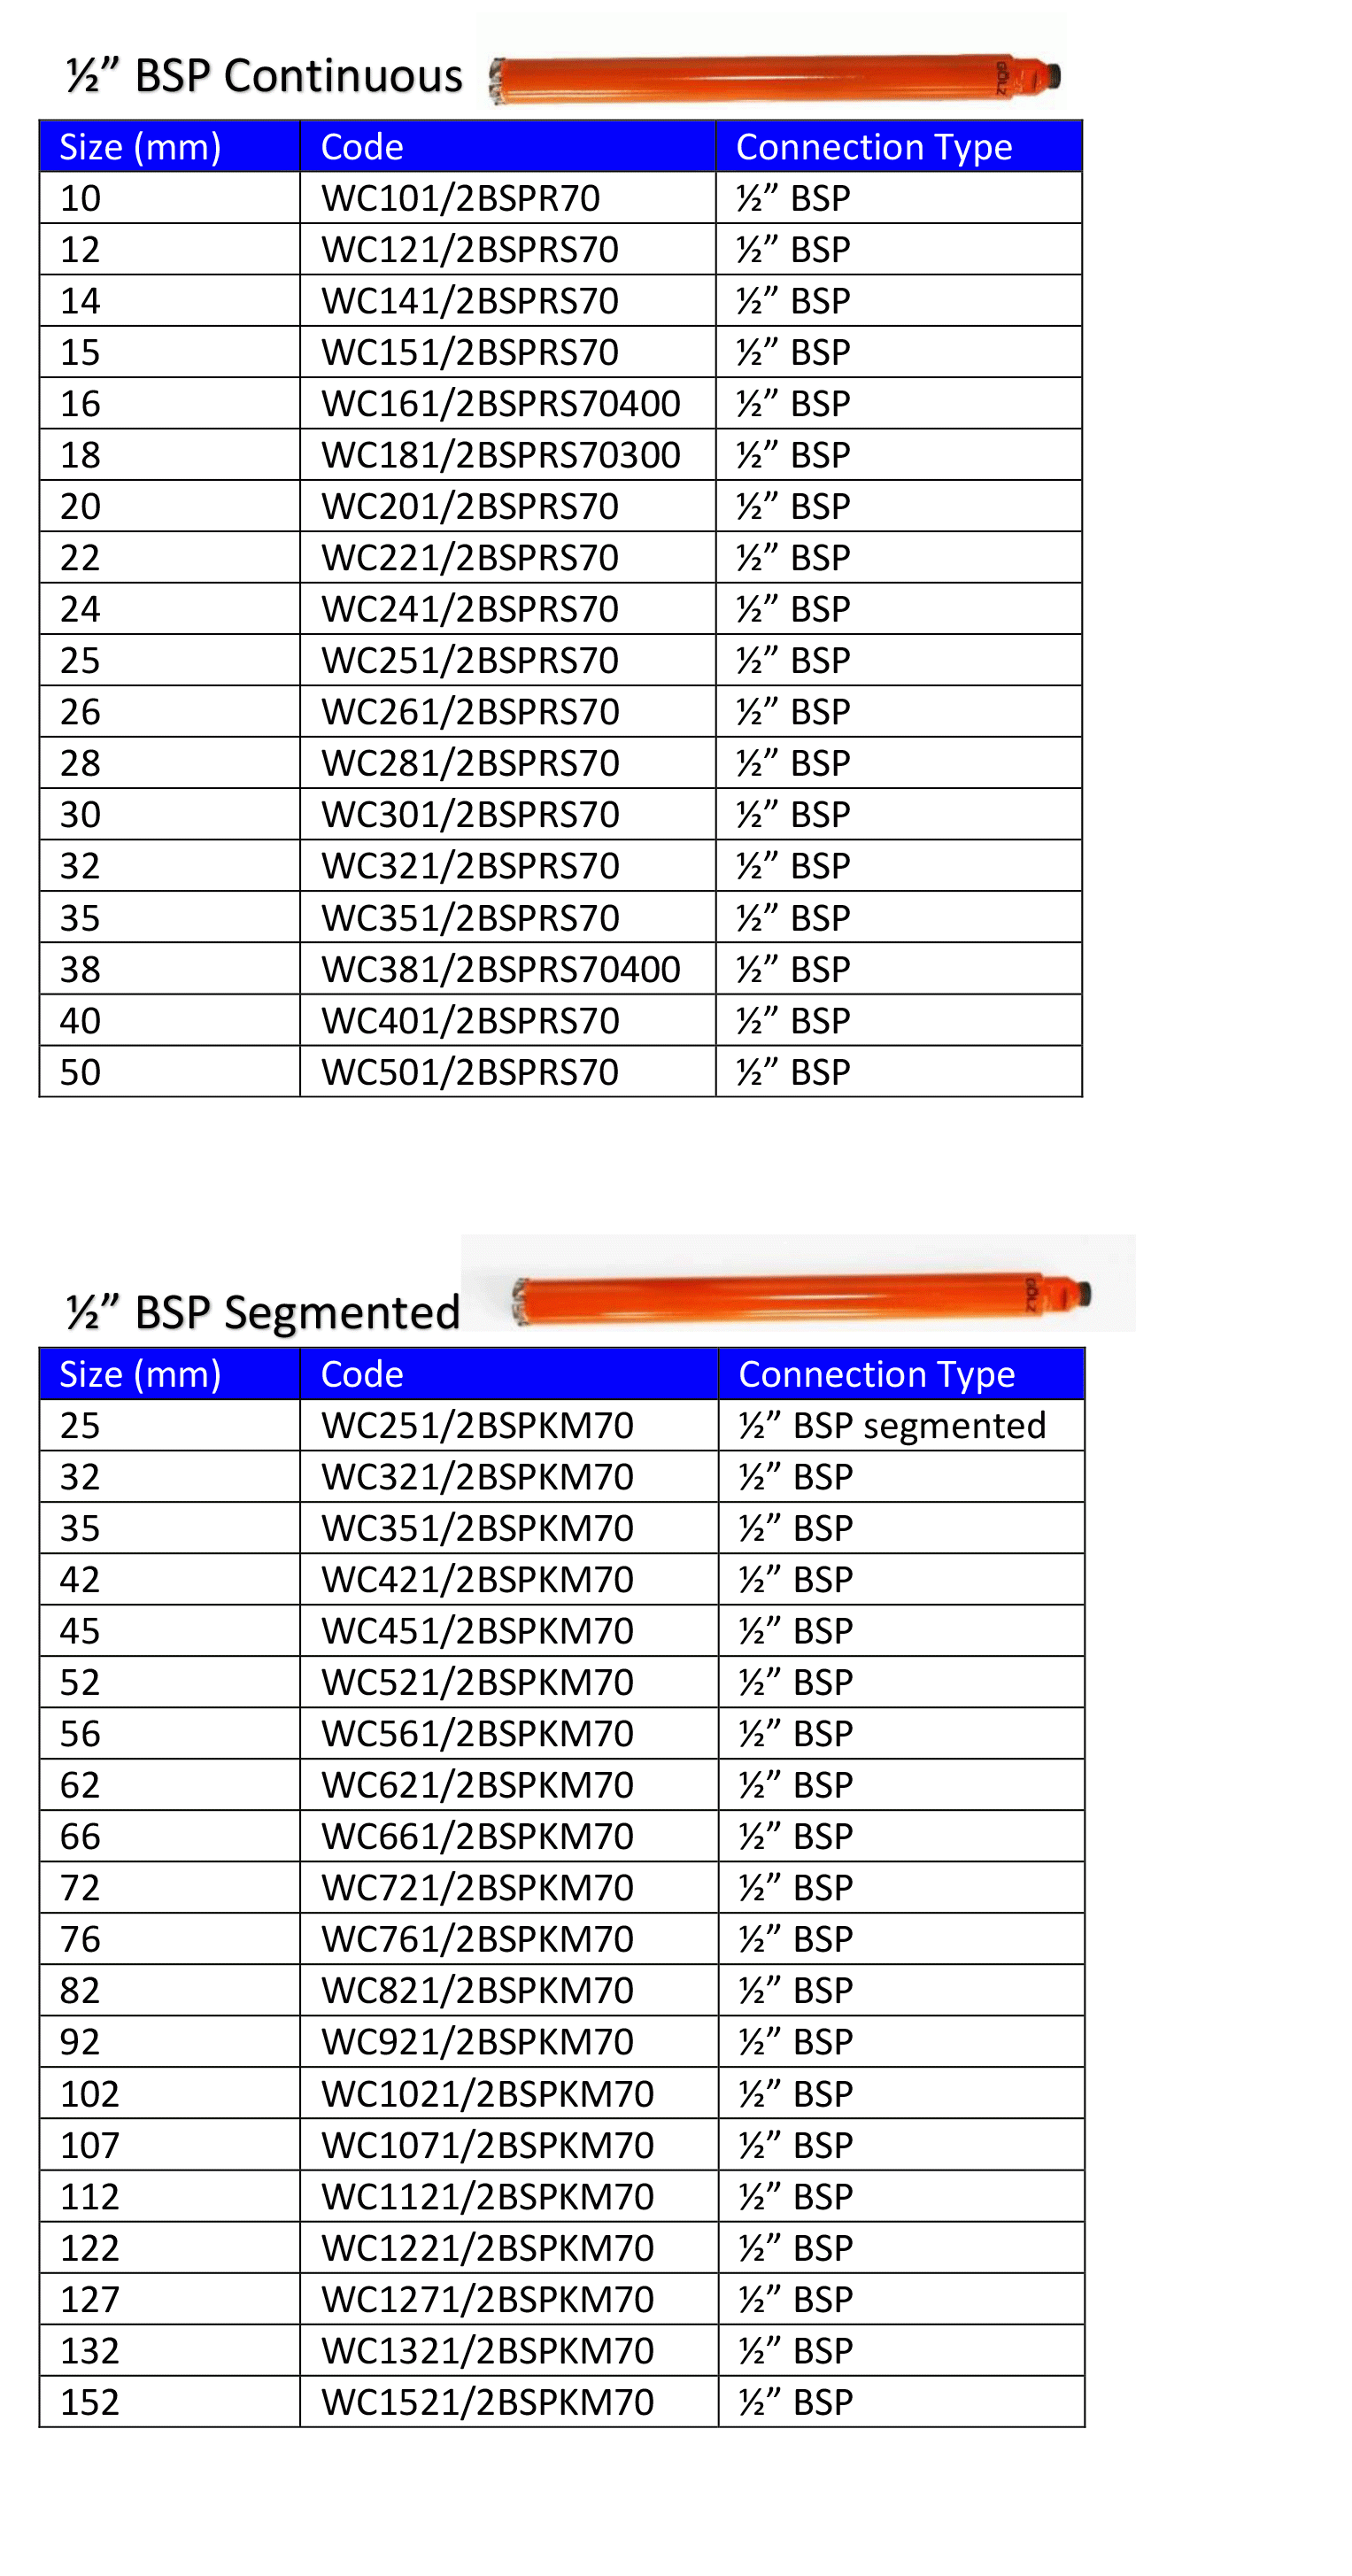 Wet-Cores-info-with-tables-to-upload-1.g